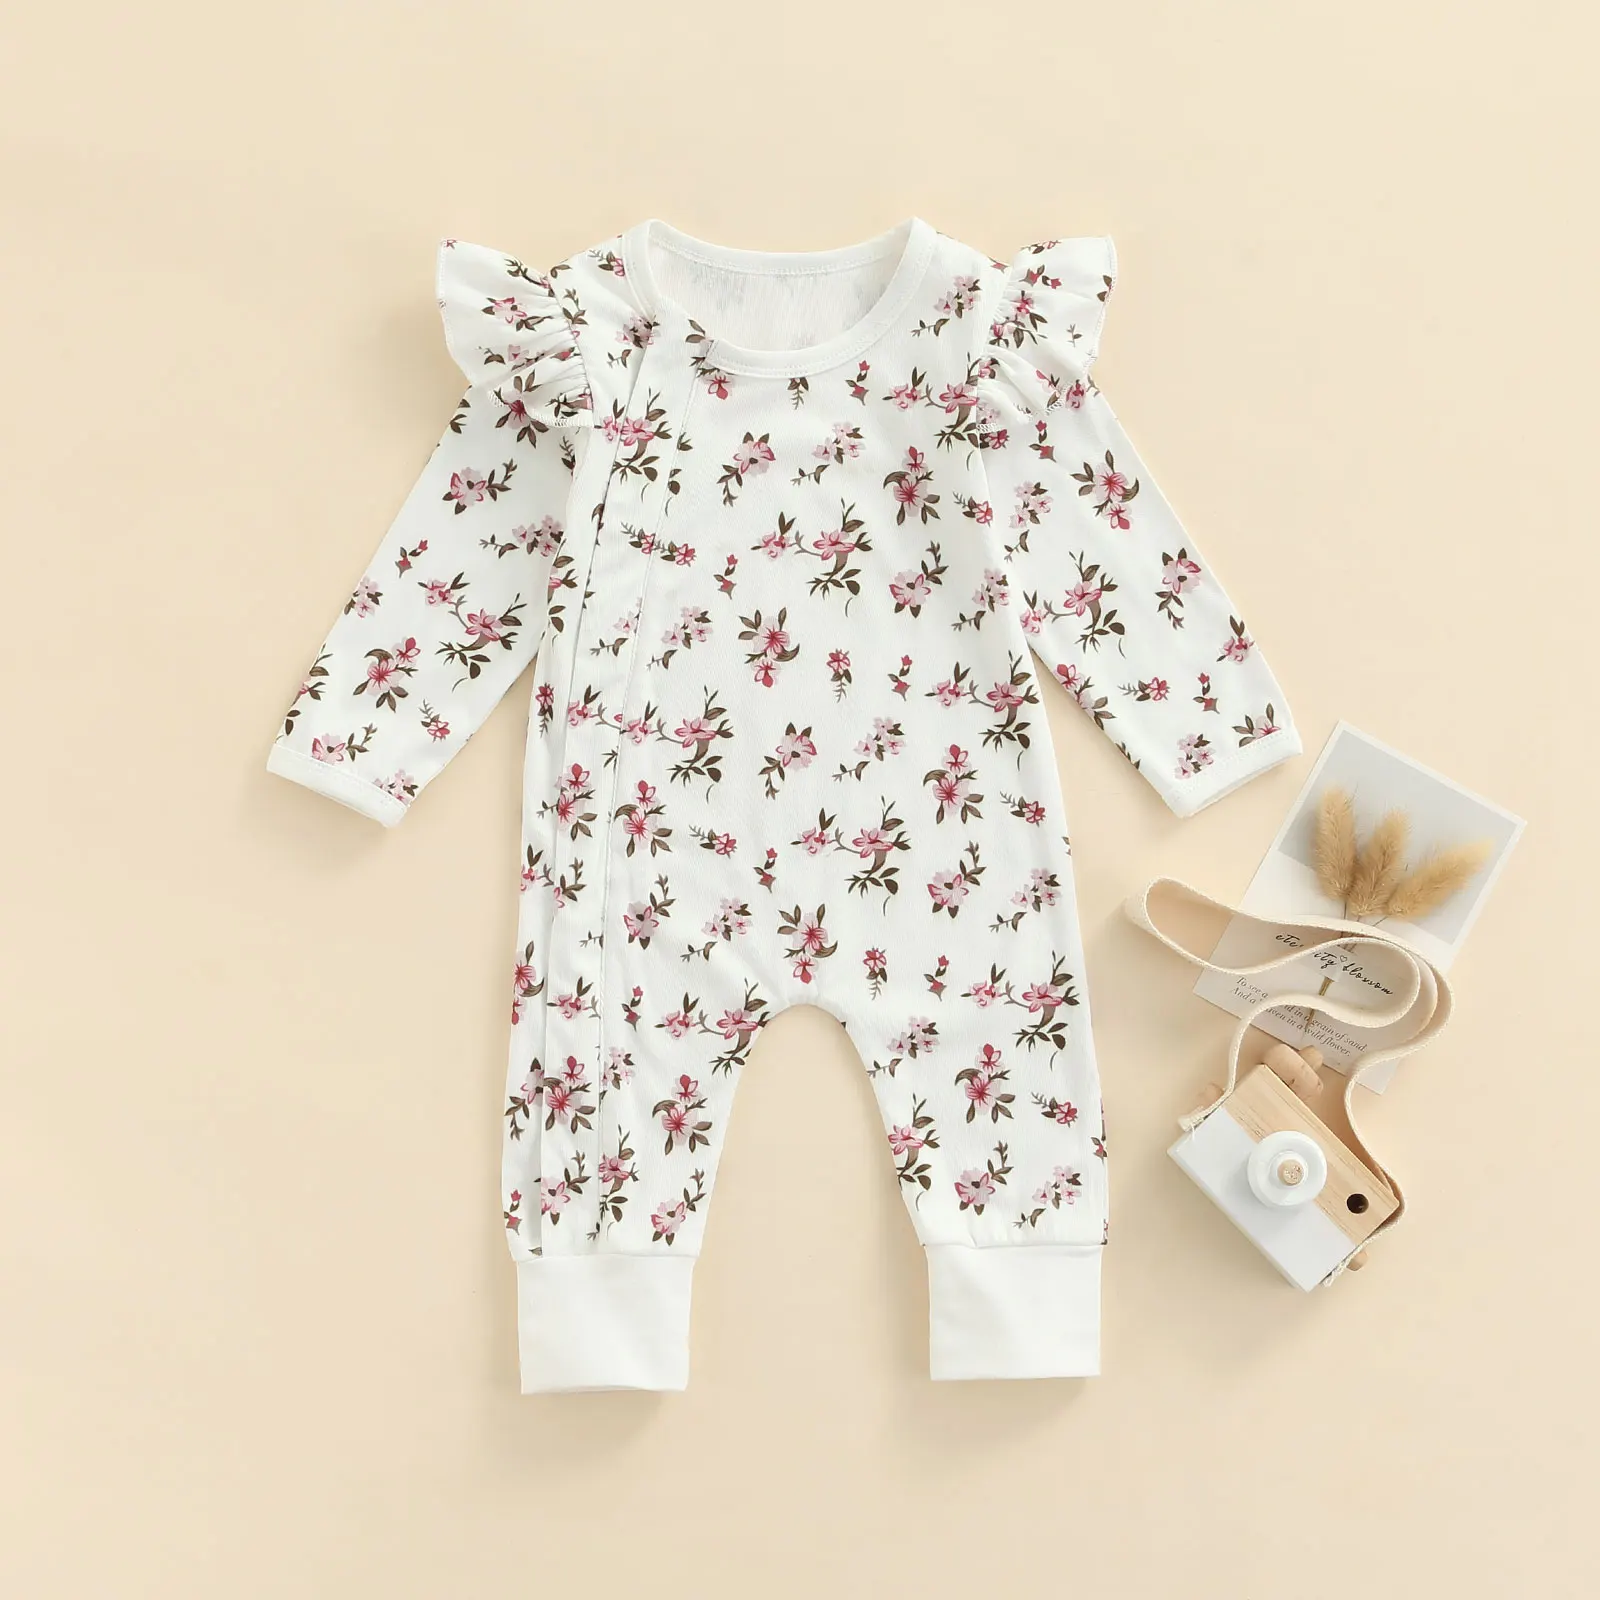 vintage Baby Bodysuits Infant Baby Girls Romper, Long Sleeve Round Neck Floral Print Knitting Fall Toddlers Jumpsuit Spring Autumn baby bodysuit dress